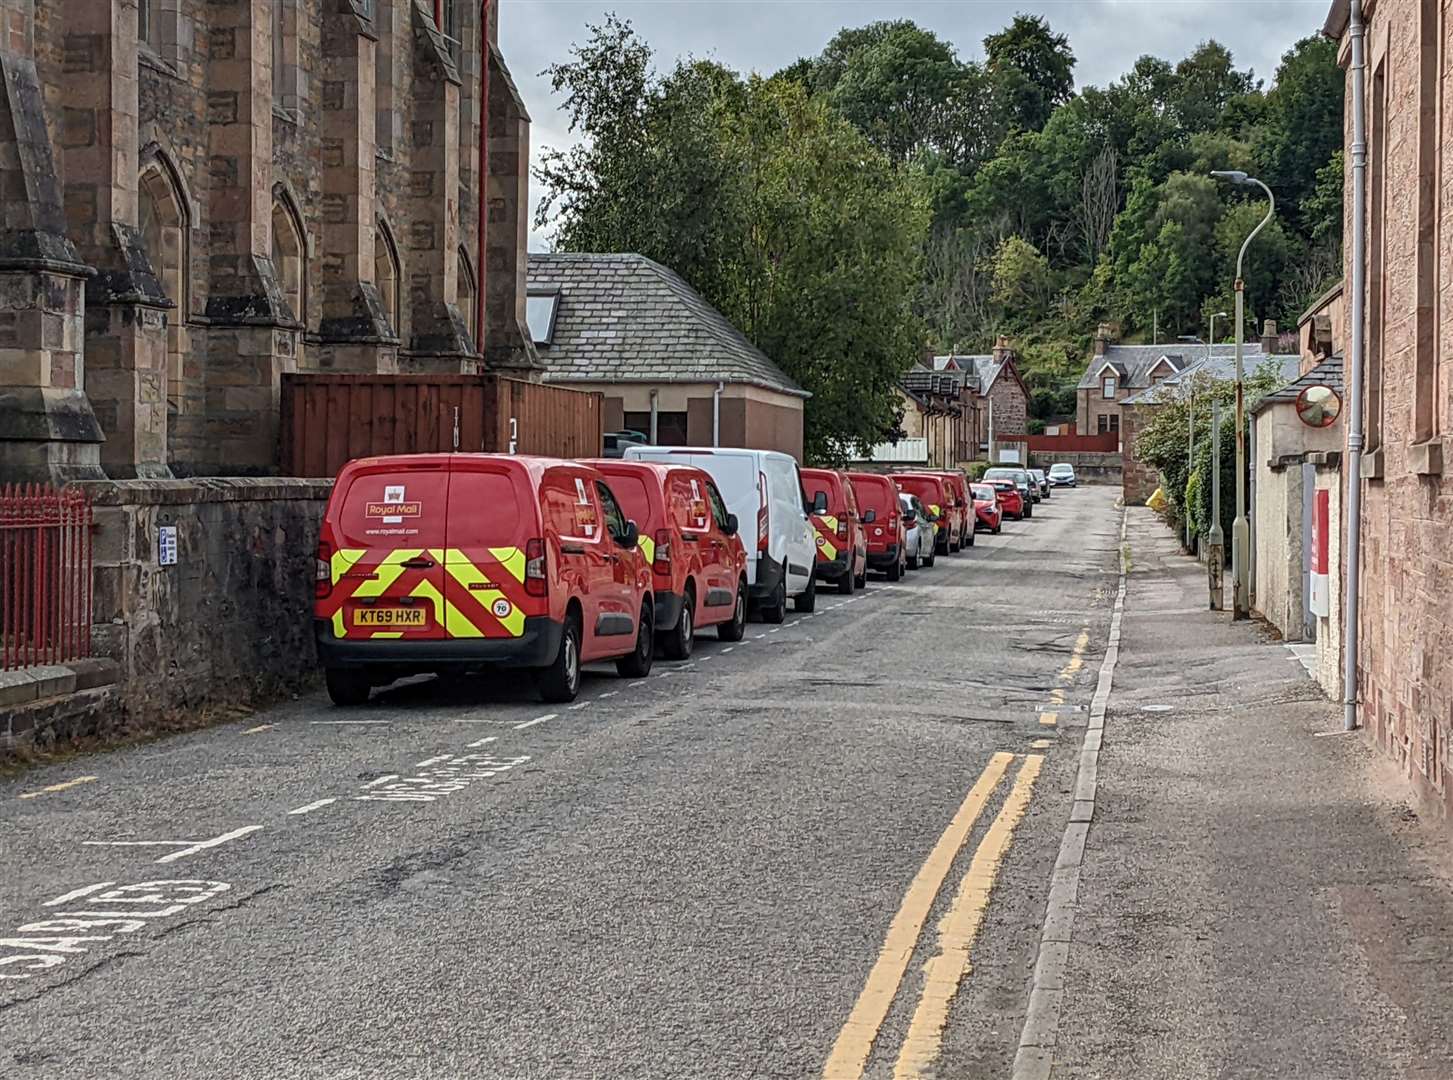 Vans that would normally be out on deliveries or collections lined up.